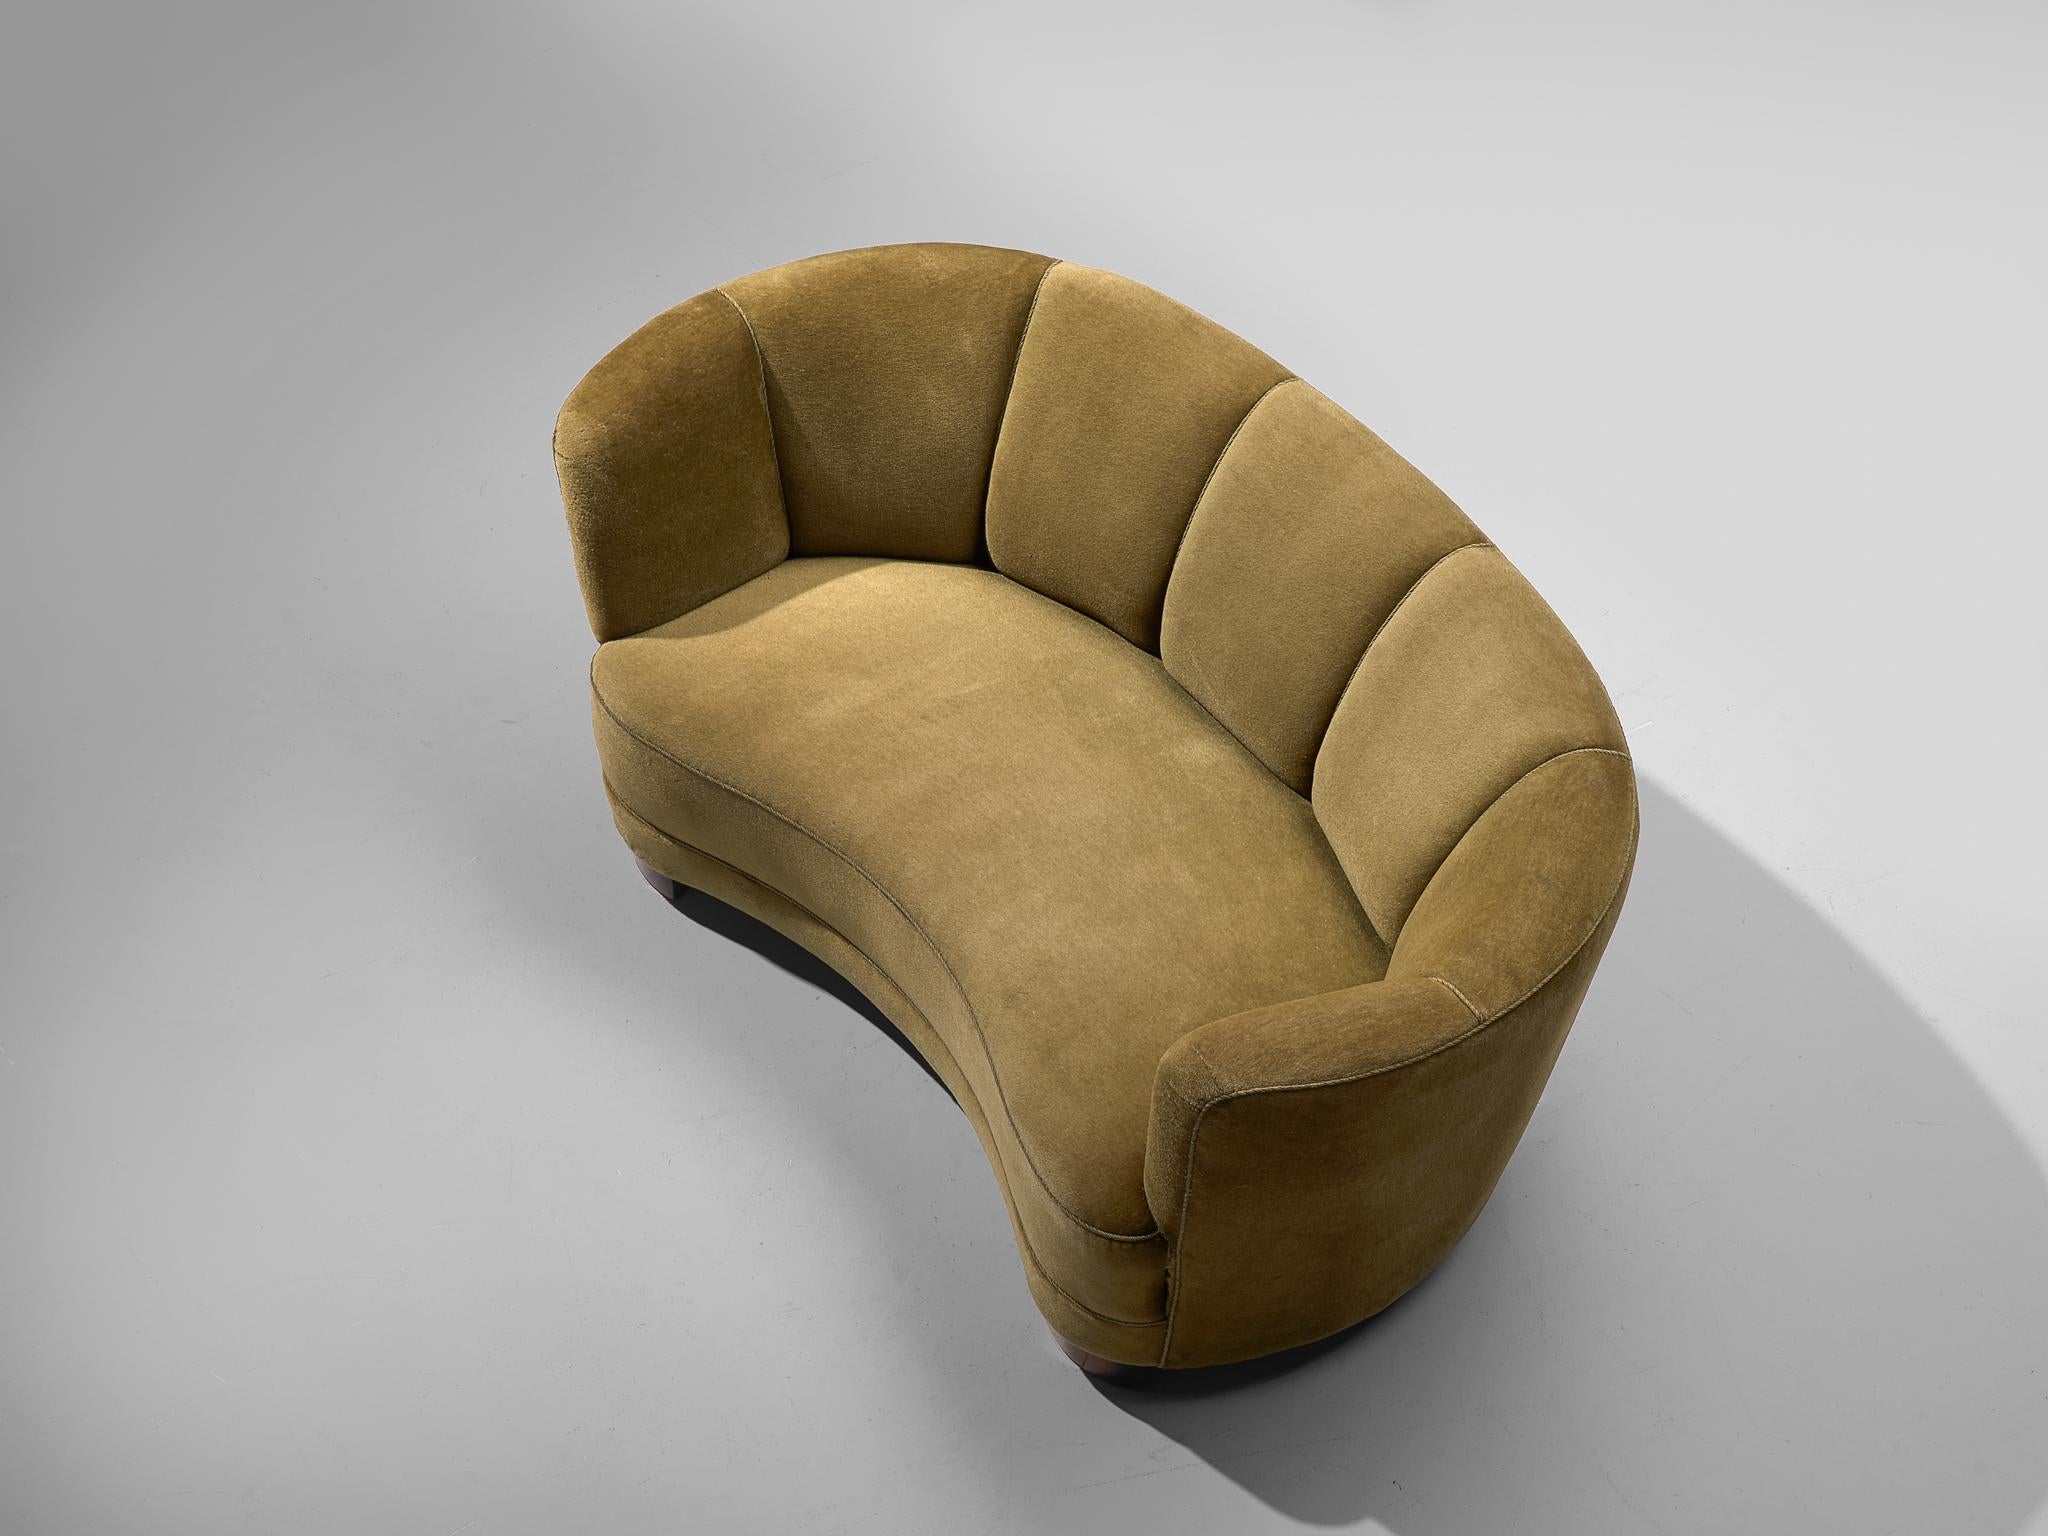 Curved settee, green fabric, oak, Denmark, 1940s

This voluptuous sofa is executed with wooden legs and a soft green fabric. The sofa shows a curved back, while the backrest is horizontal straight and flows over into the bulky armrests. The sofa is